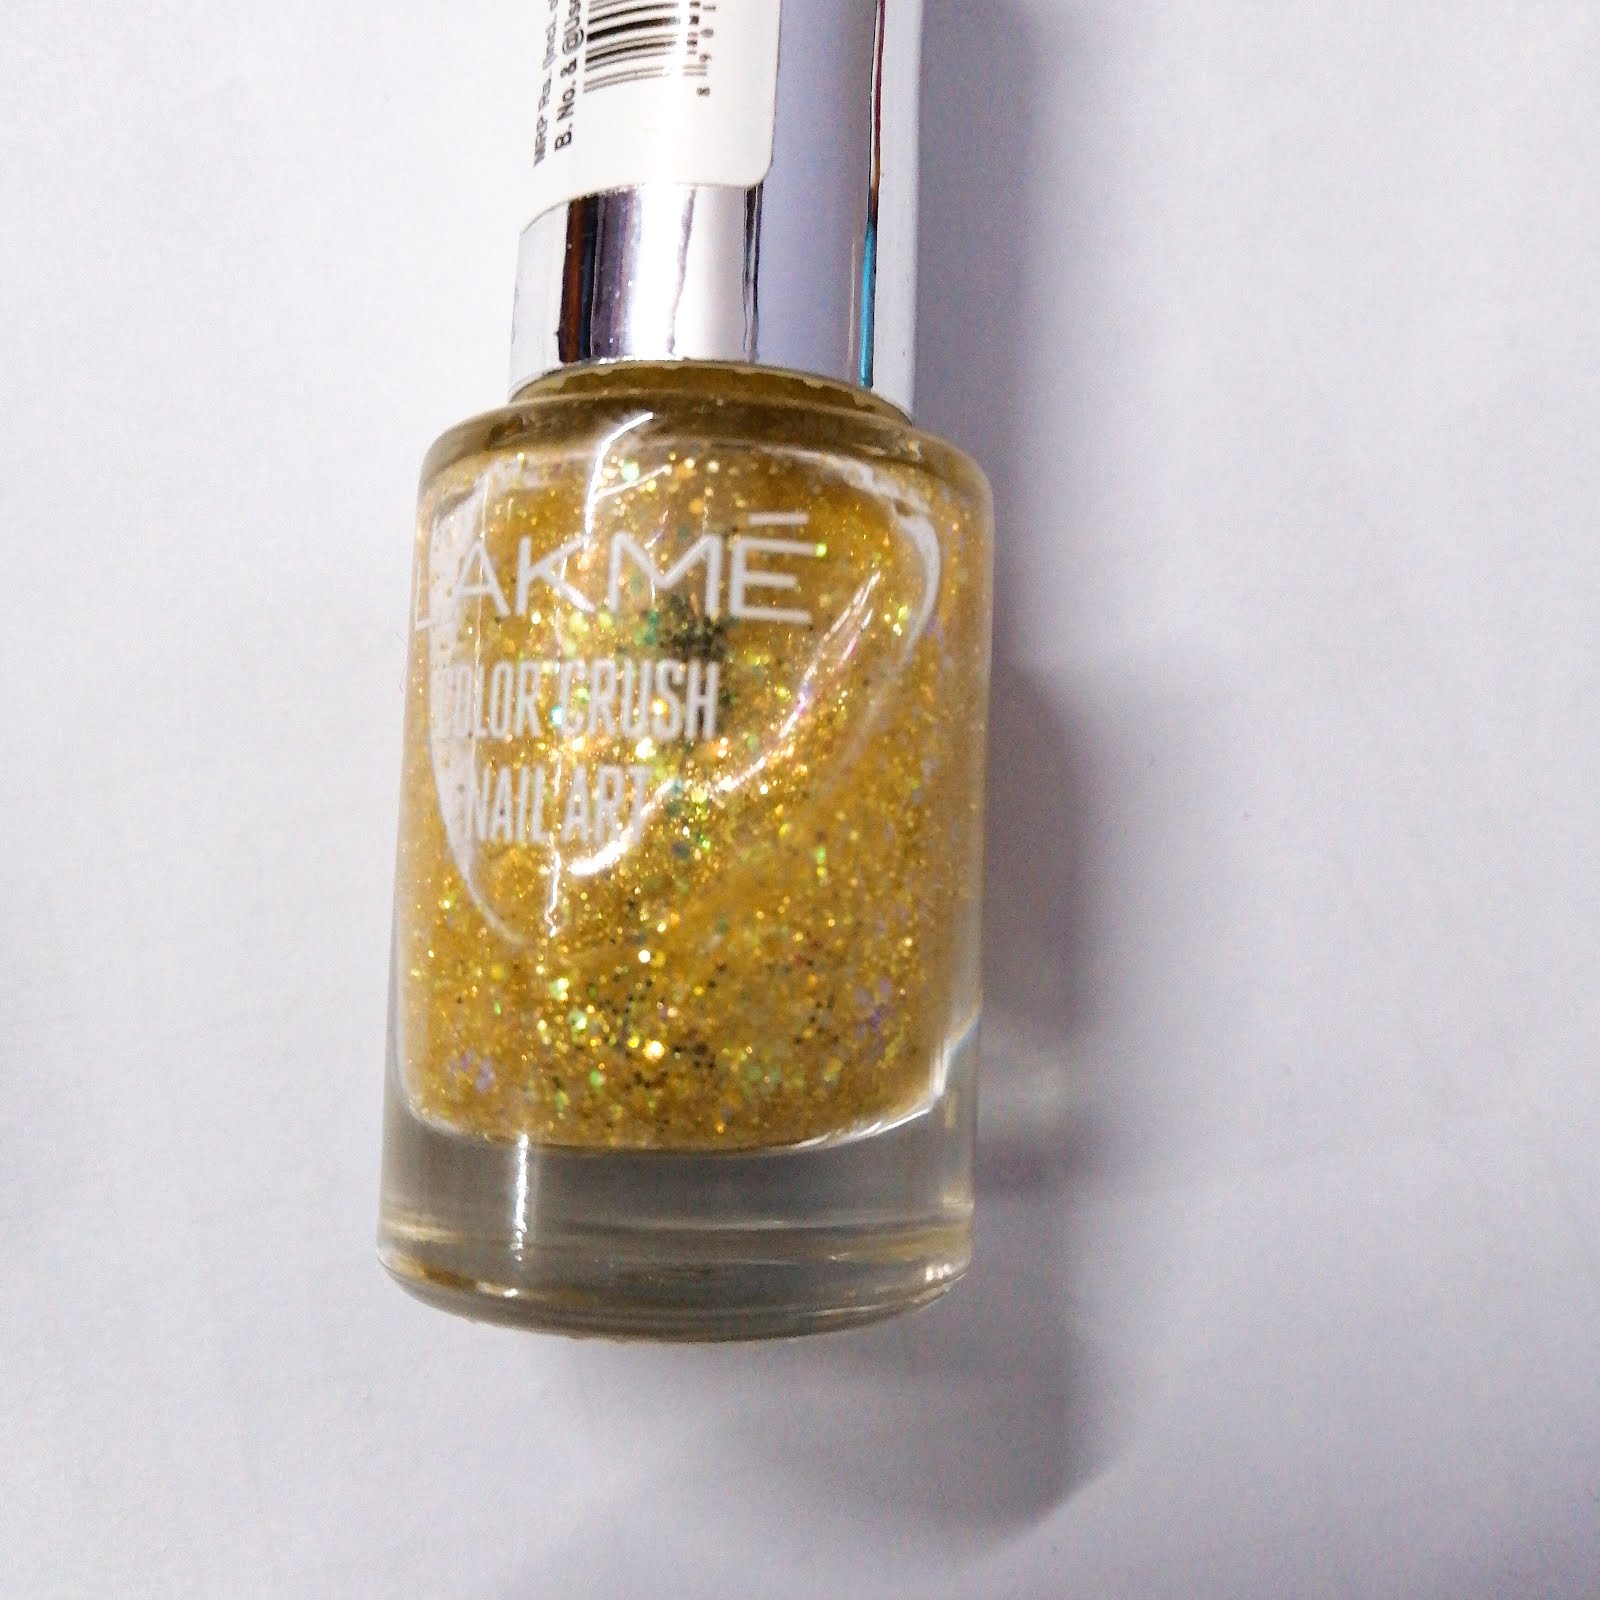 Lakme Absolute Color Illusion Nail Polish Fantasy: Review and Swatches –  Vanitynoapologies | Indian Makeup and Beauty Blog